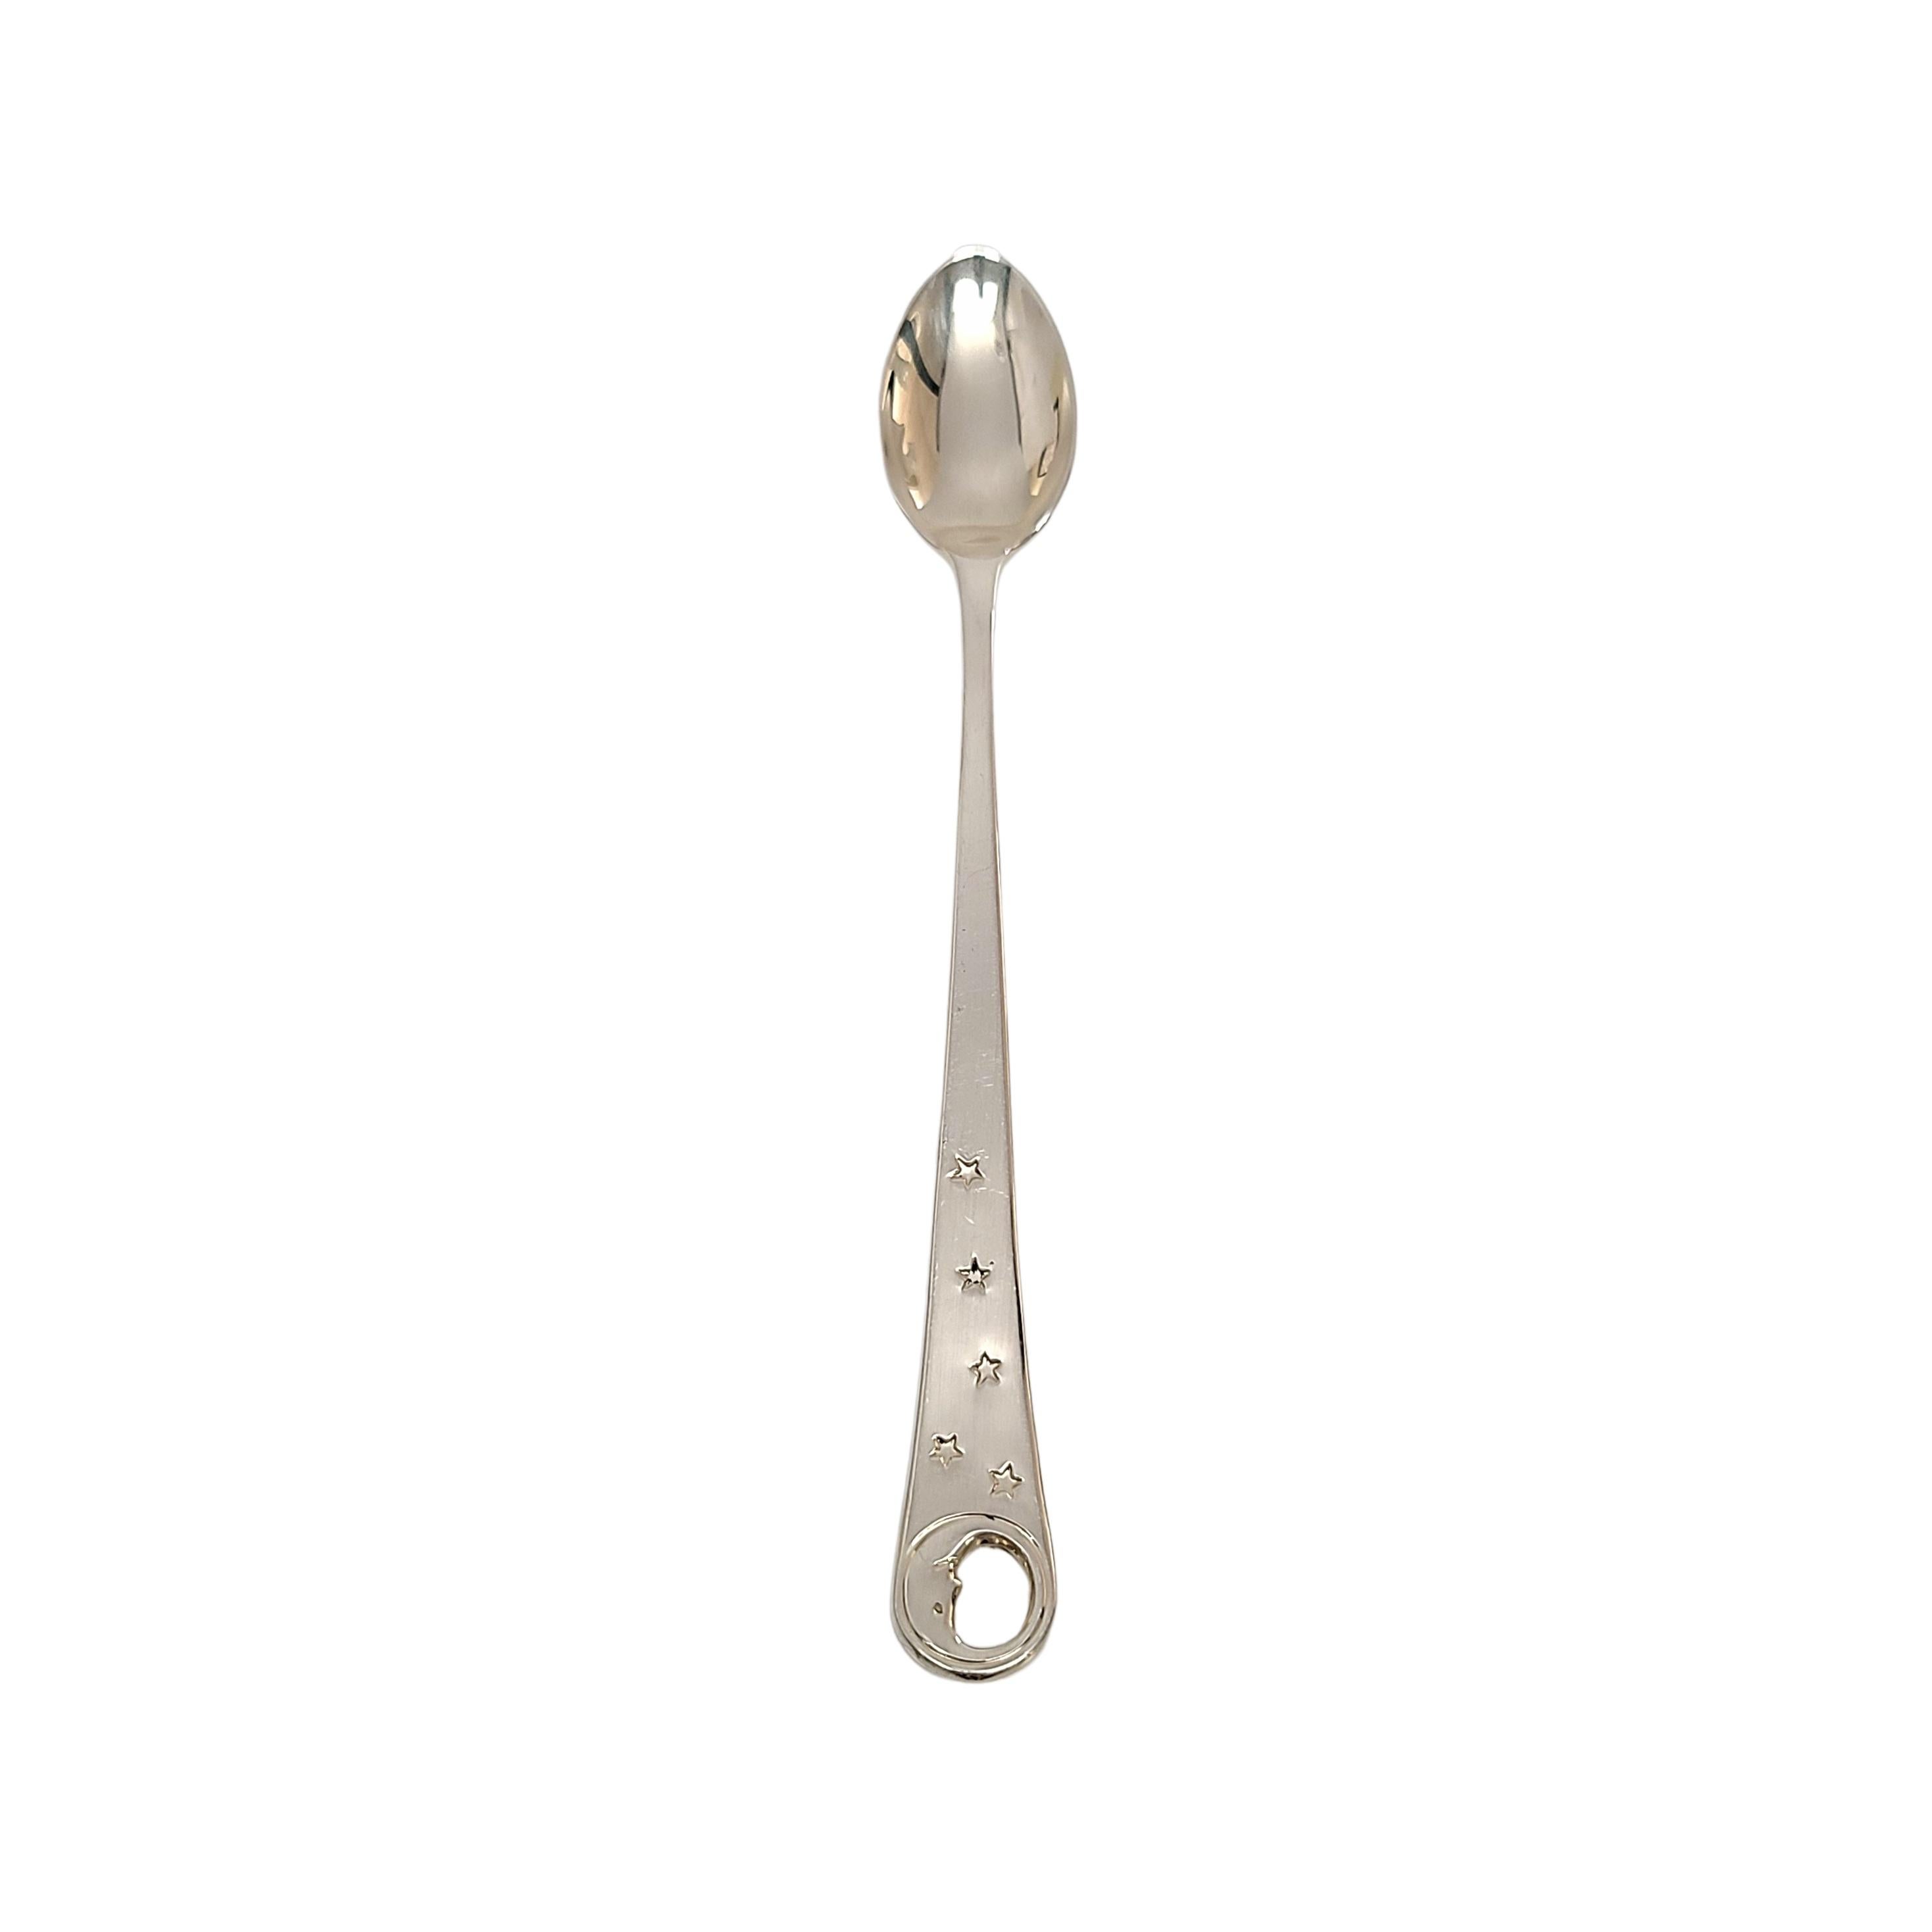 Tiffany & Co sterling silver Man in the Moon baby feeding spoon.

A simple and classic design featuring an open moon face at the top of the handle with stars scattered down the handle. No monogram or engraving. Includes Tiffany & Co pouch.

Measures